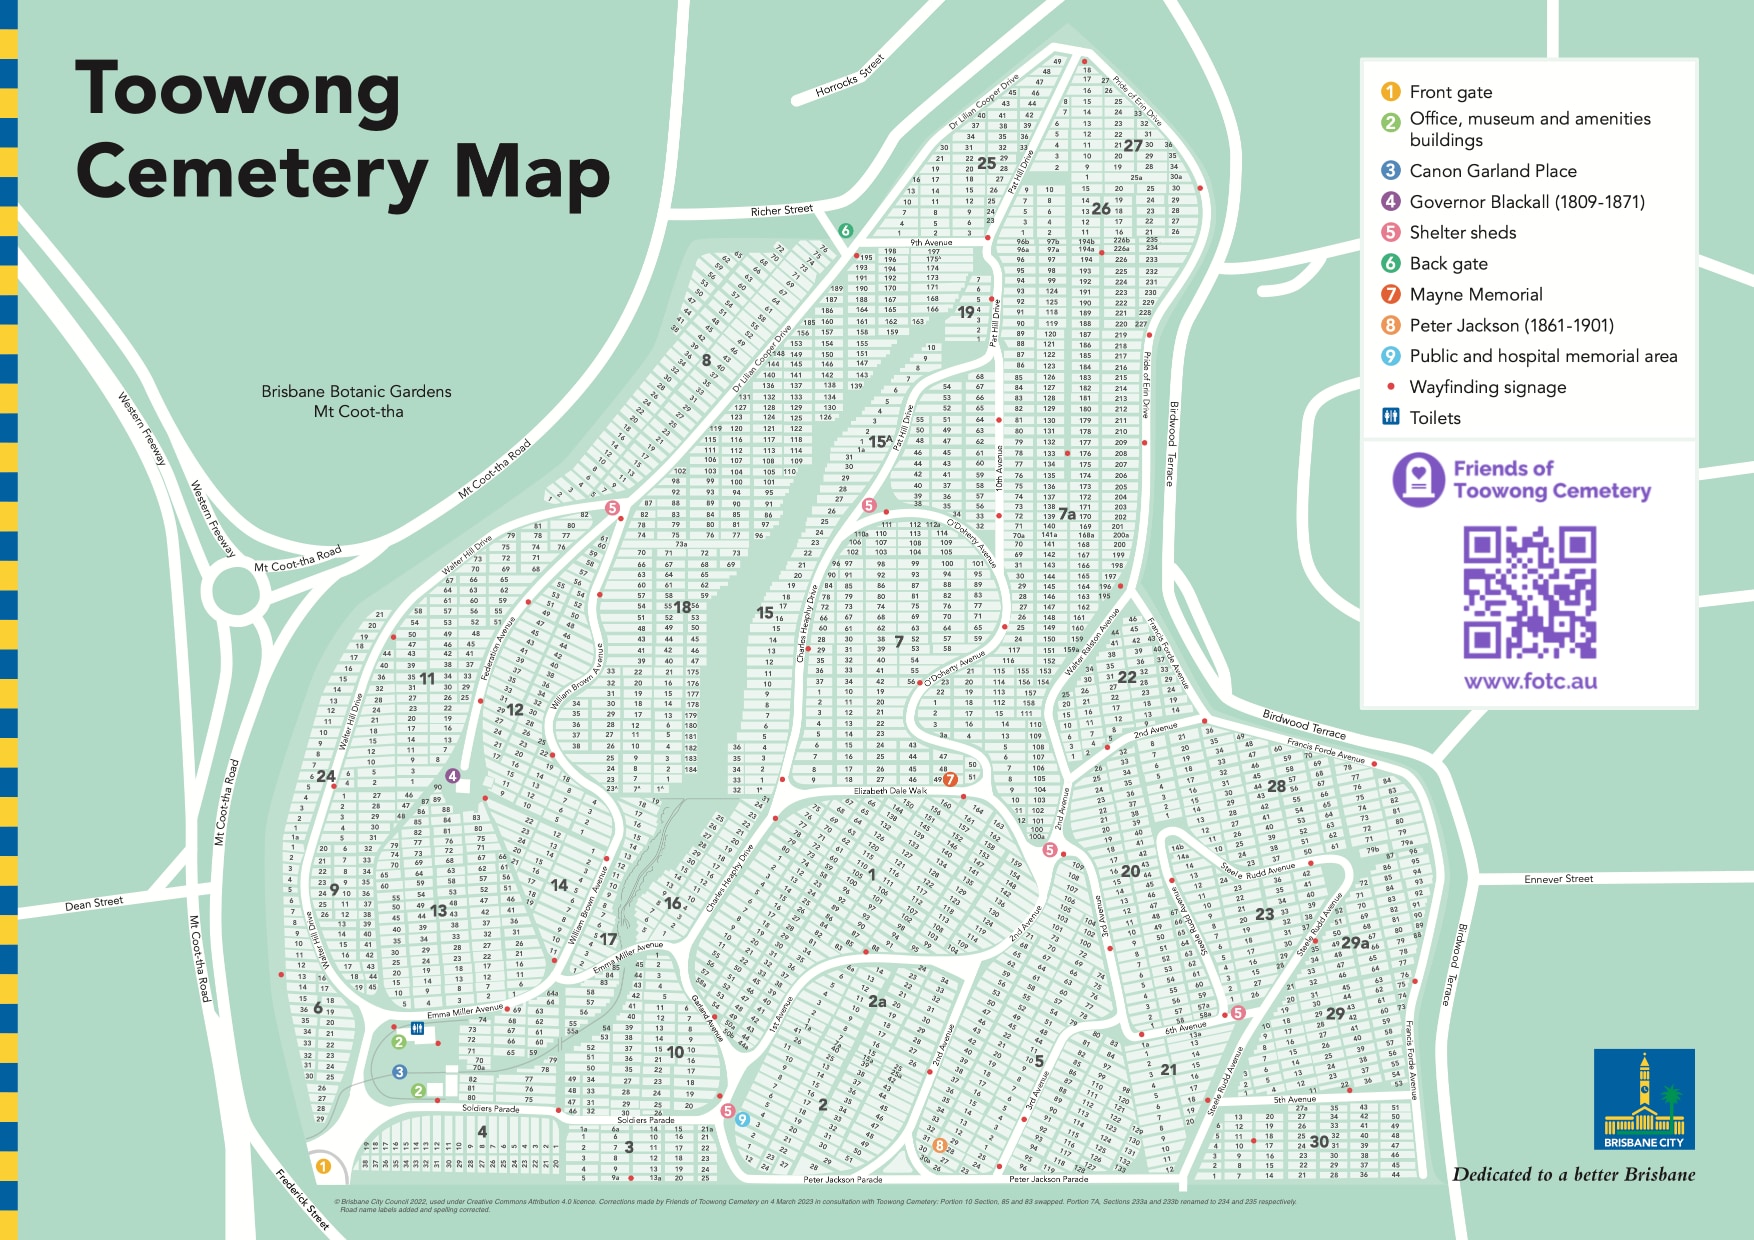 Toowong Cemetery Map showing Portions, Sections and key features